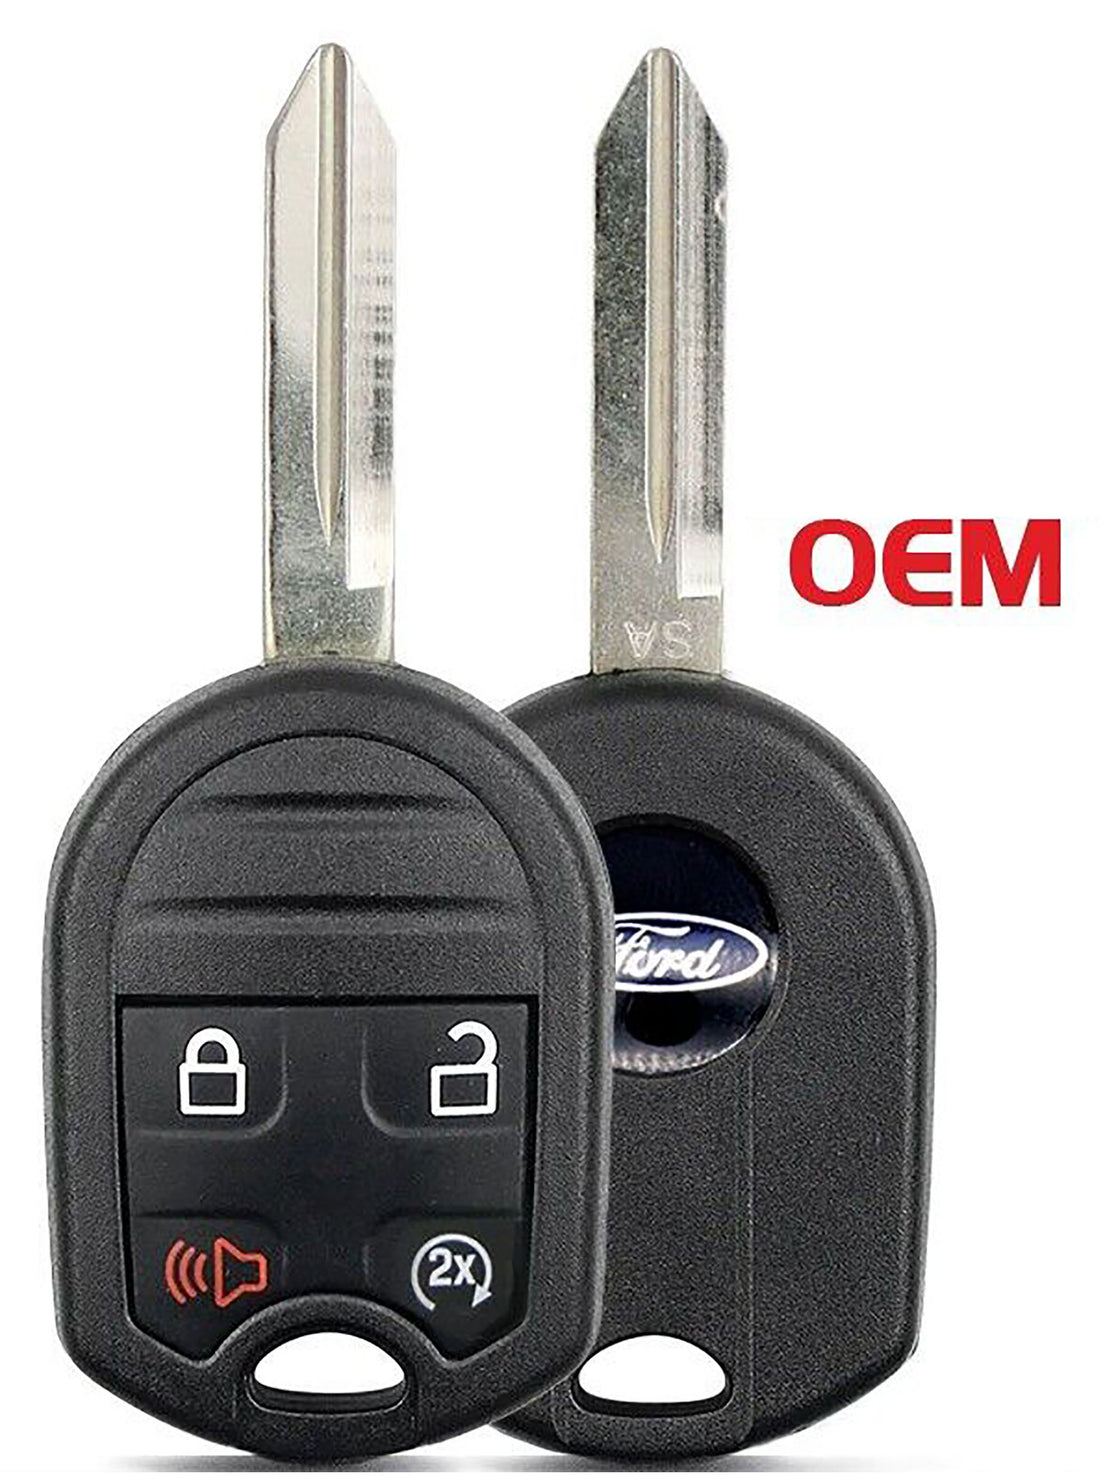 1x New OEM Factory Keyless Entry Remote Key Fob Compatible with & Fit For Ford Lincoln 315 MHz - MPN CWTWB1U793-OEM-04